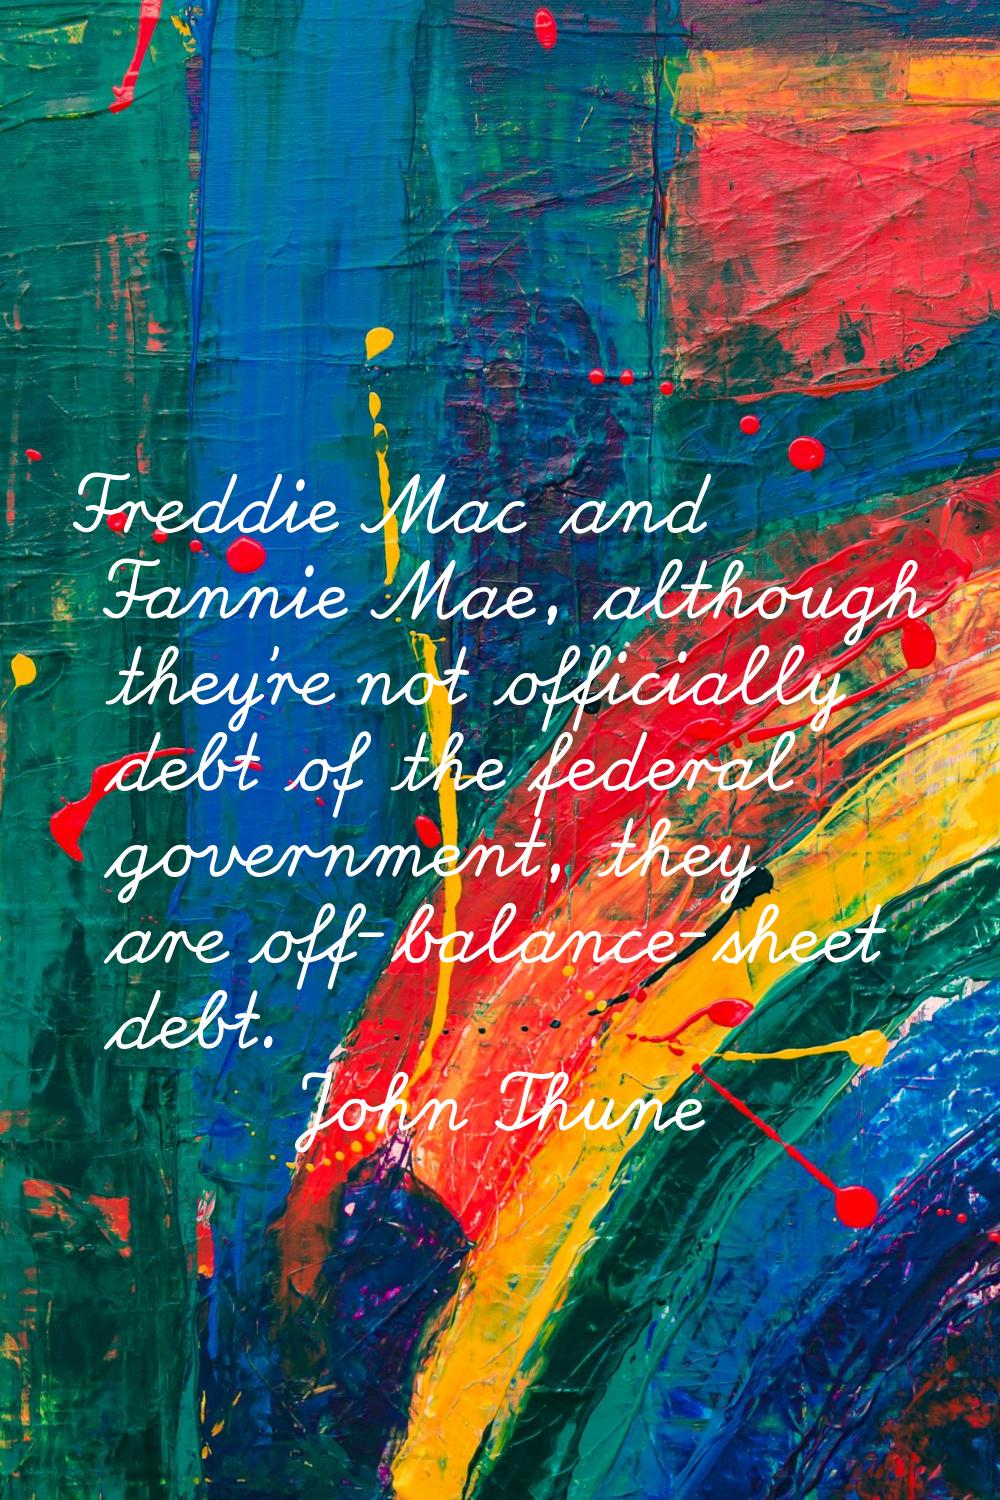 Freddie Mac and Fannie Mae, although they're not officially debt of the federal government, they ar